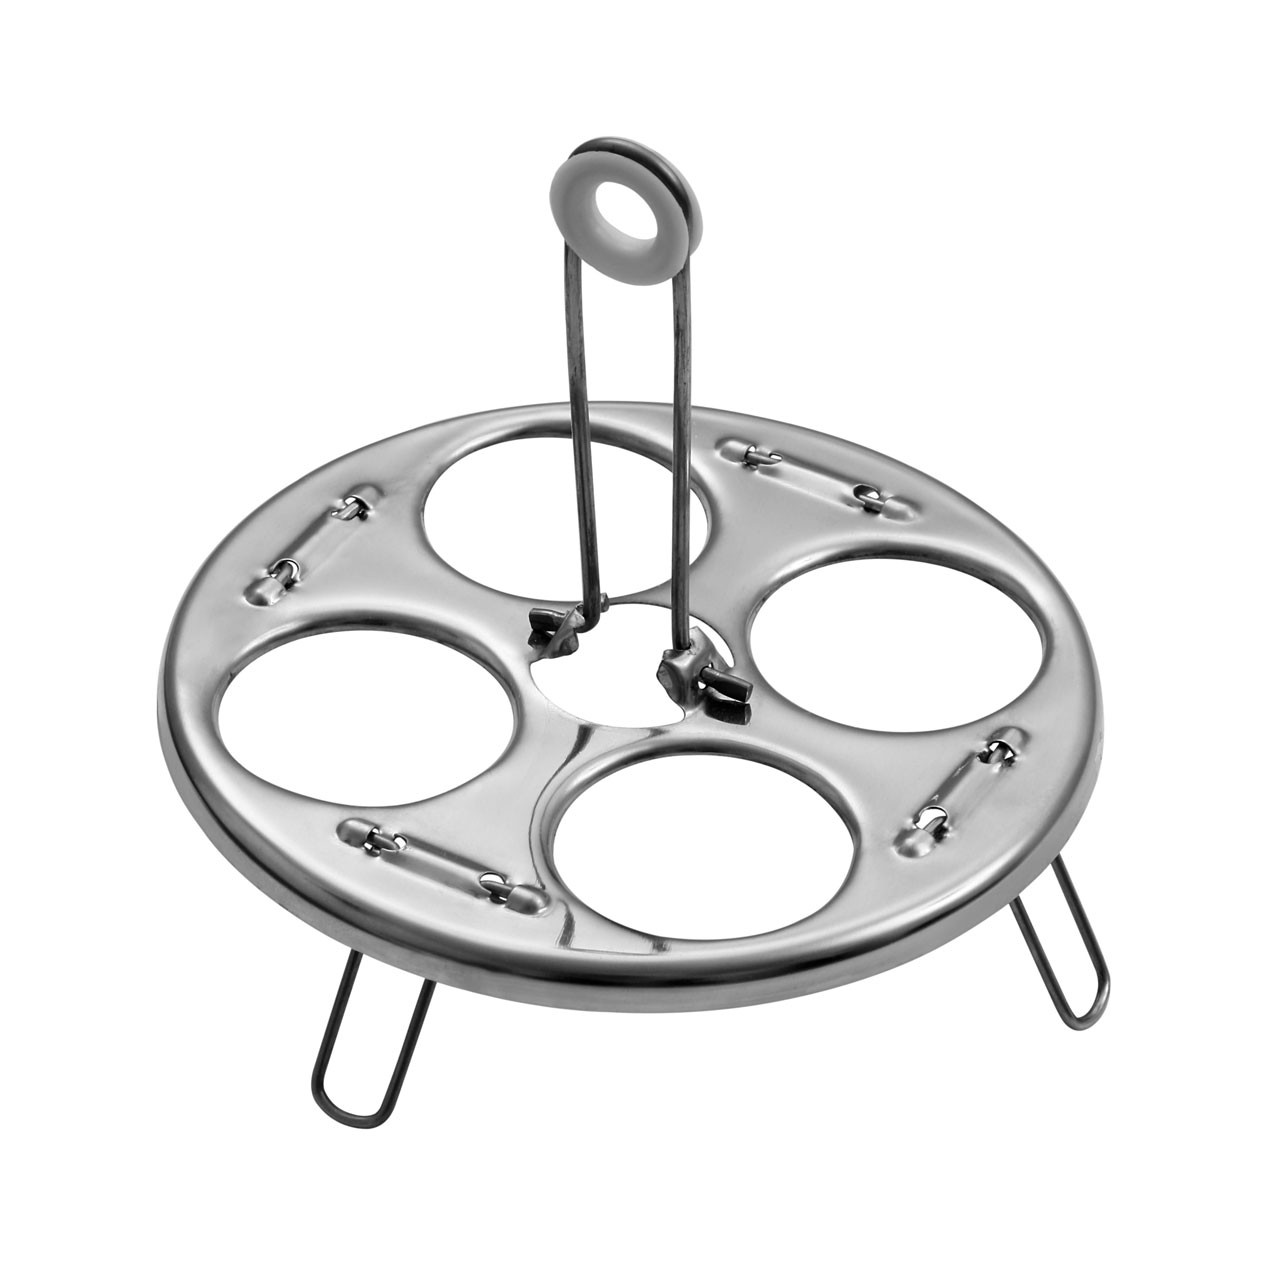 Bygone Egg Poacher and Lifter, Stainless Steel - Silver